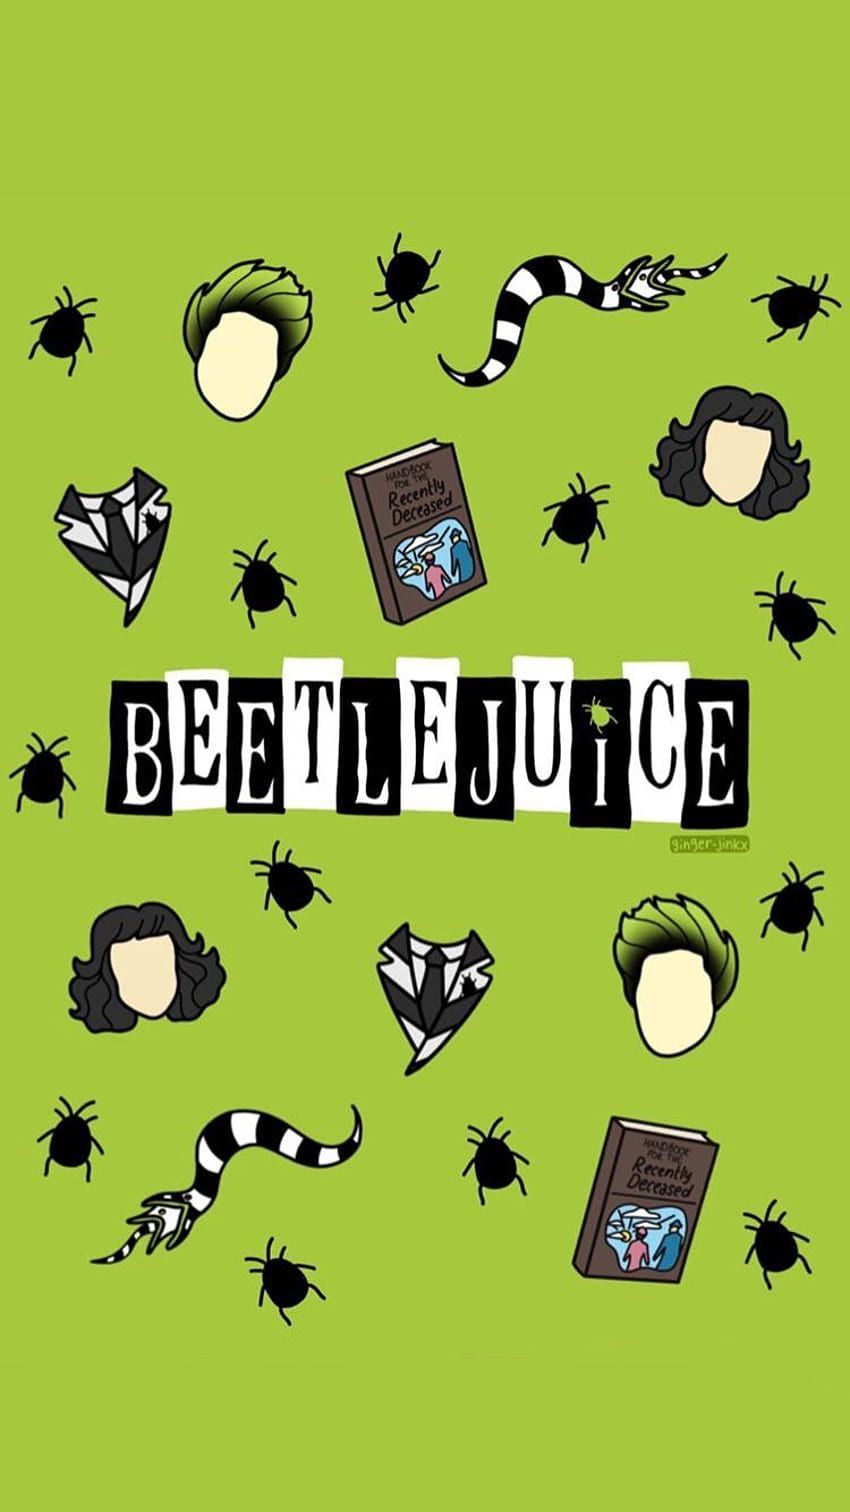 A poster with the words beetlejuice and some other objects - Broadway